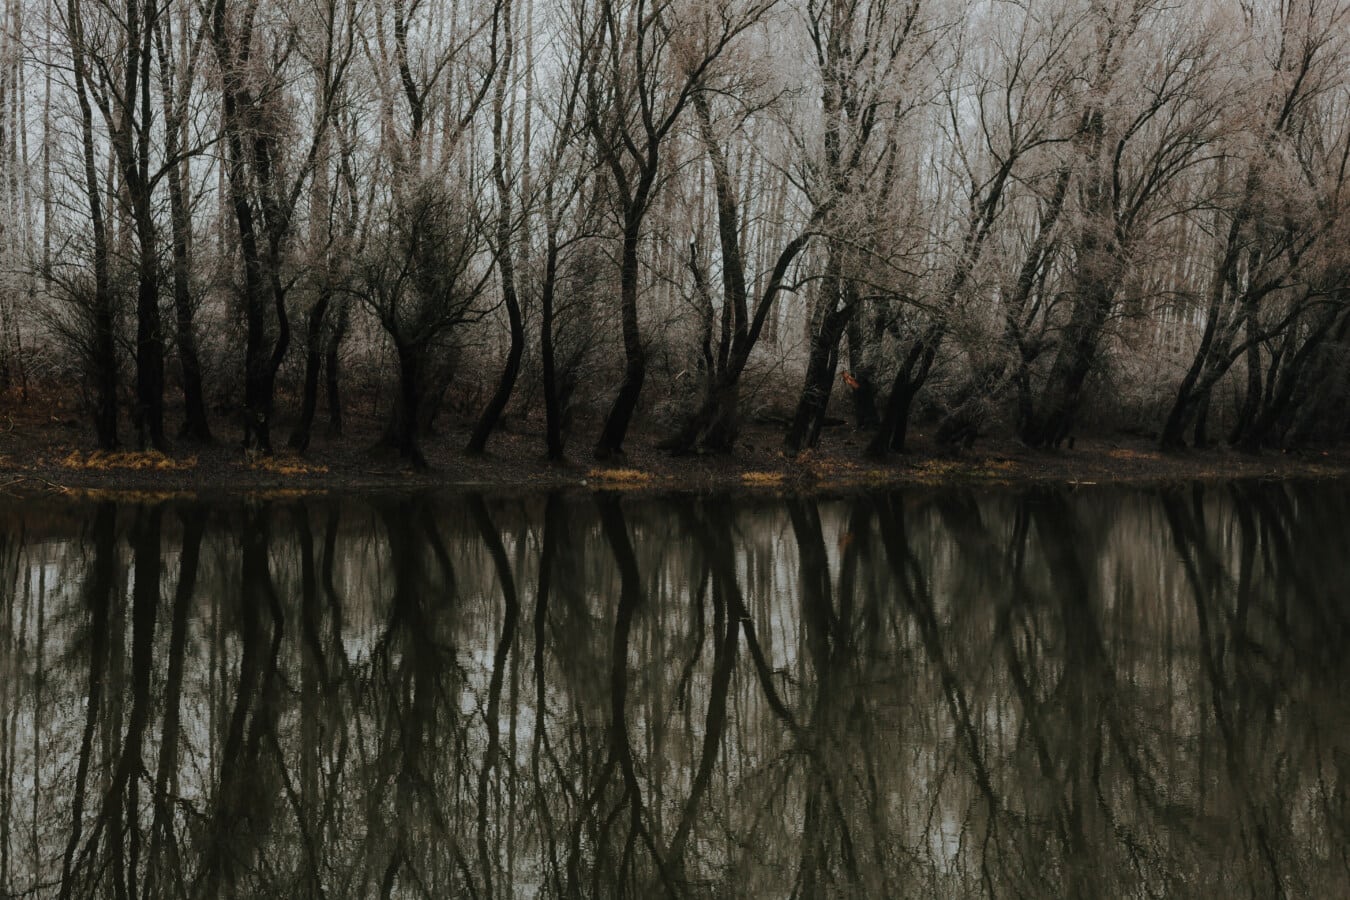 channel, river, waterway, calm, water level, reflection, trees, wetland, tree, land